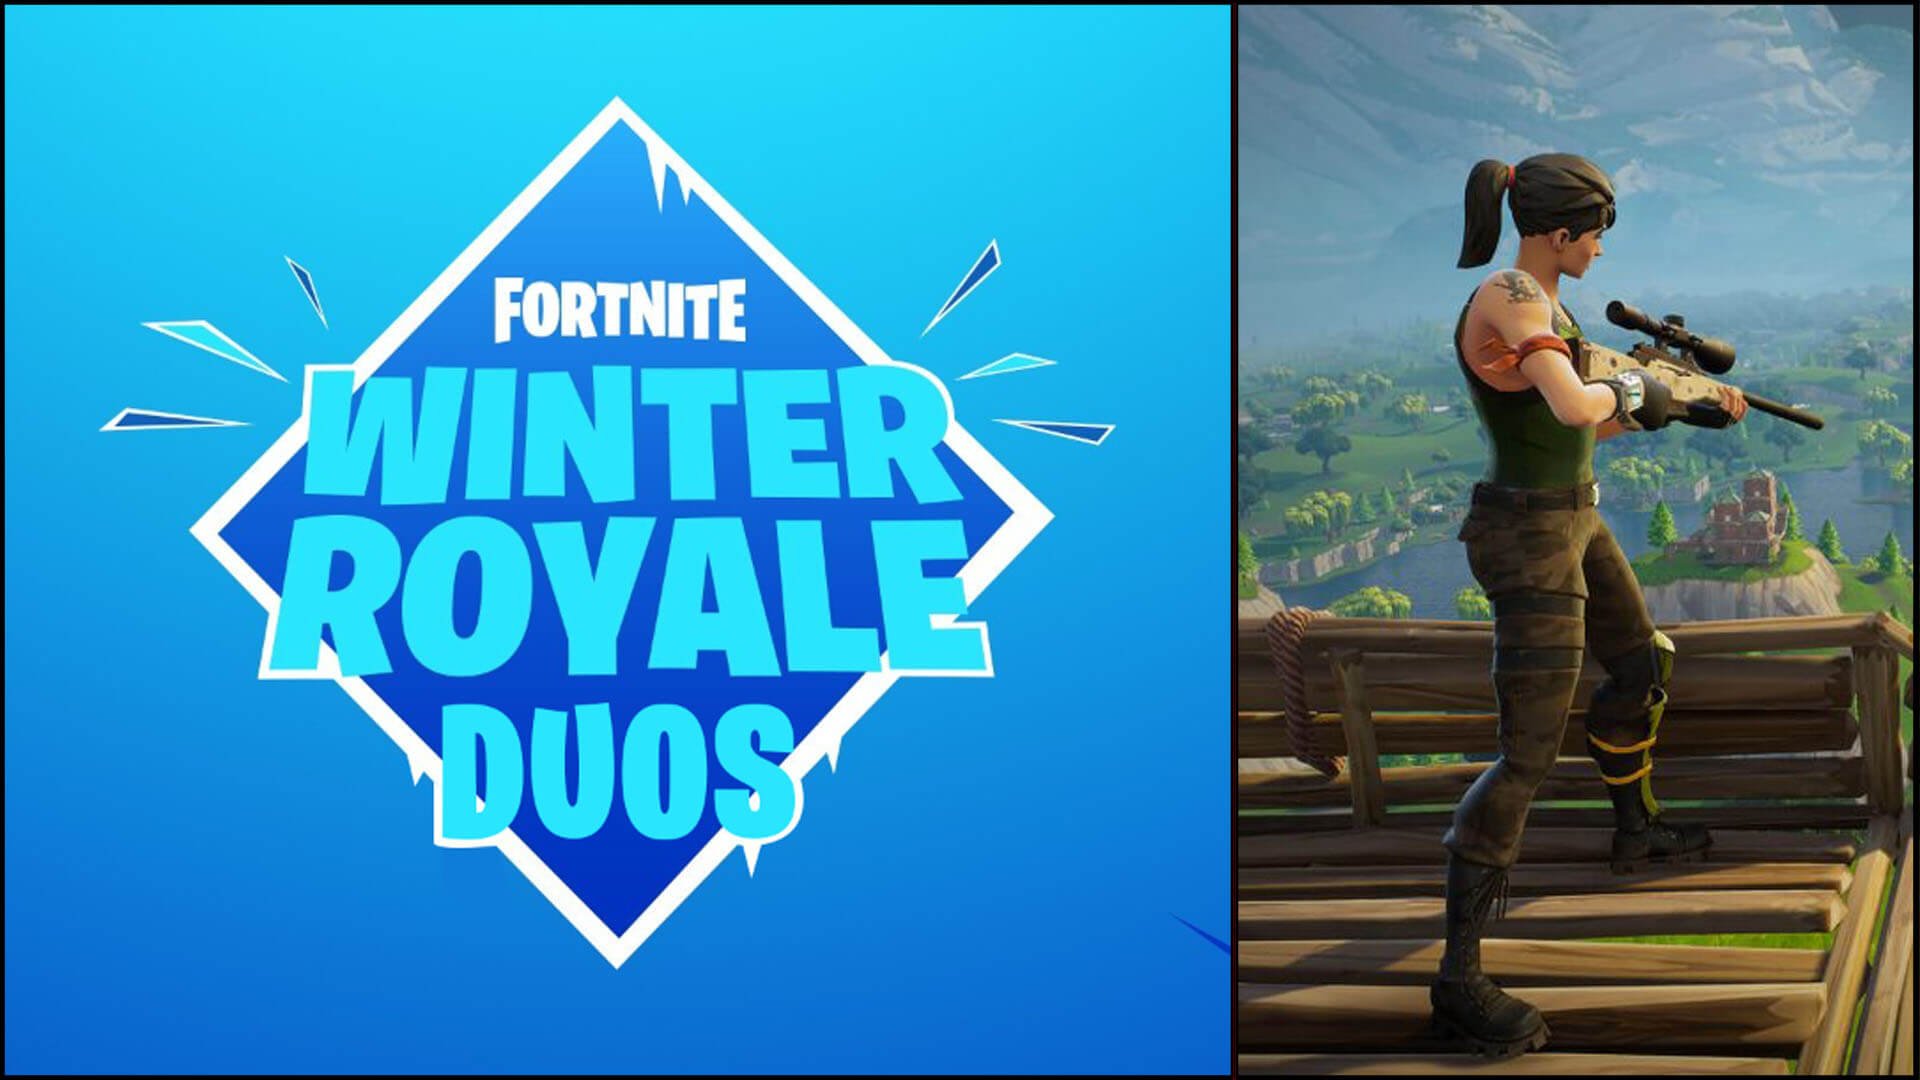 Top Confirmed Duos For Winter Royale